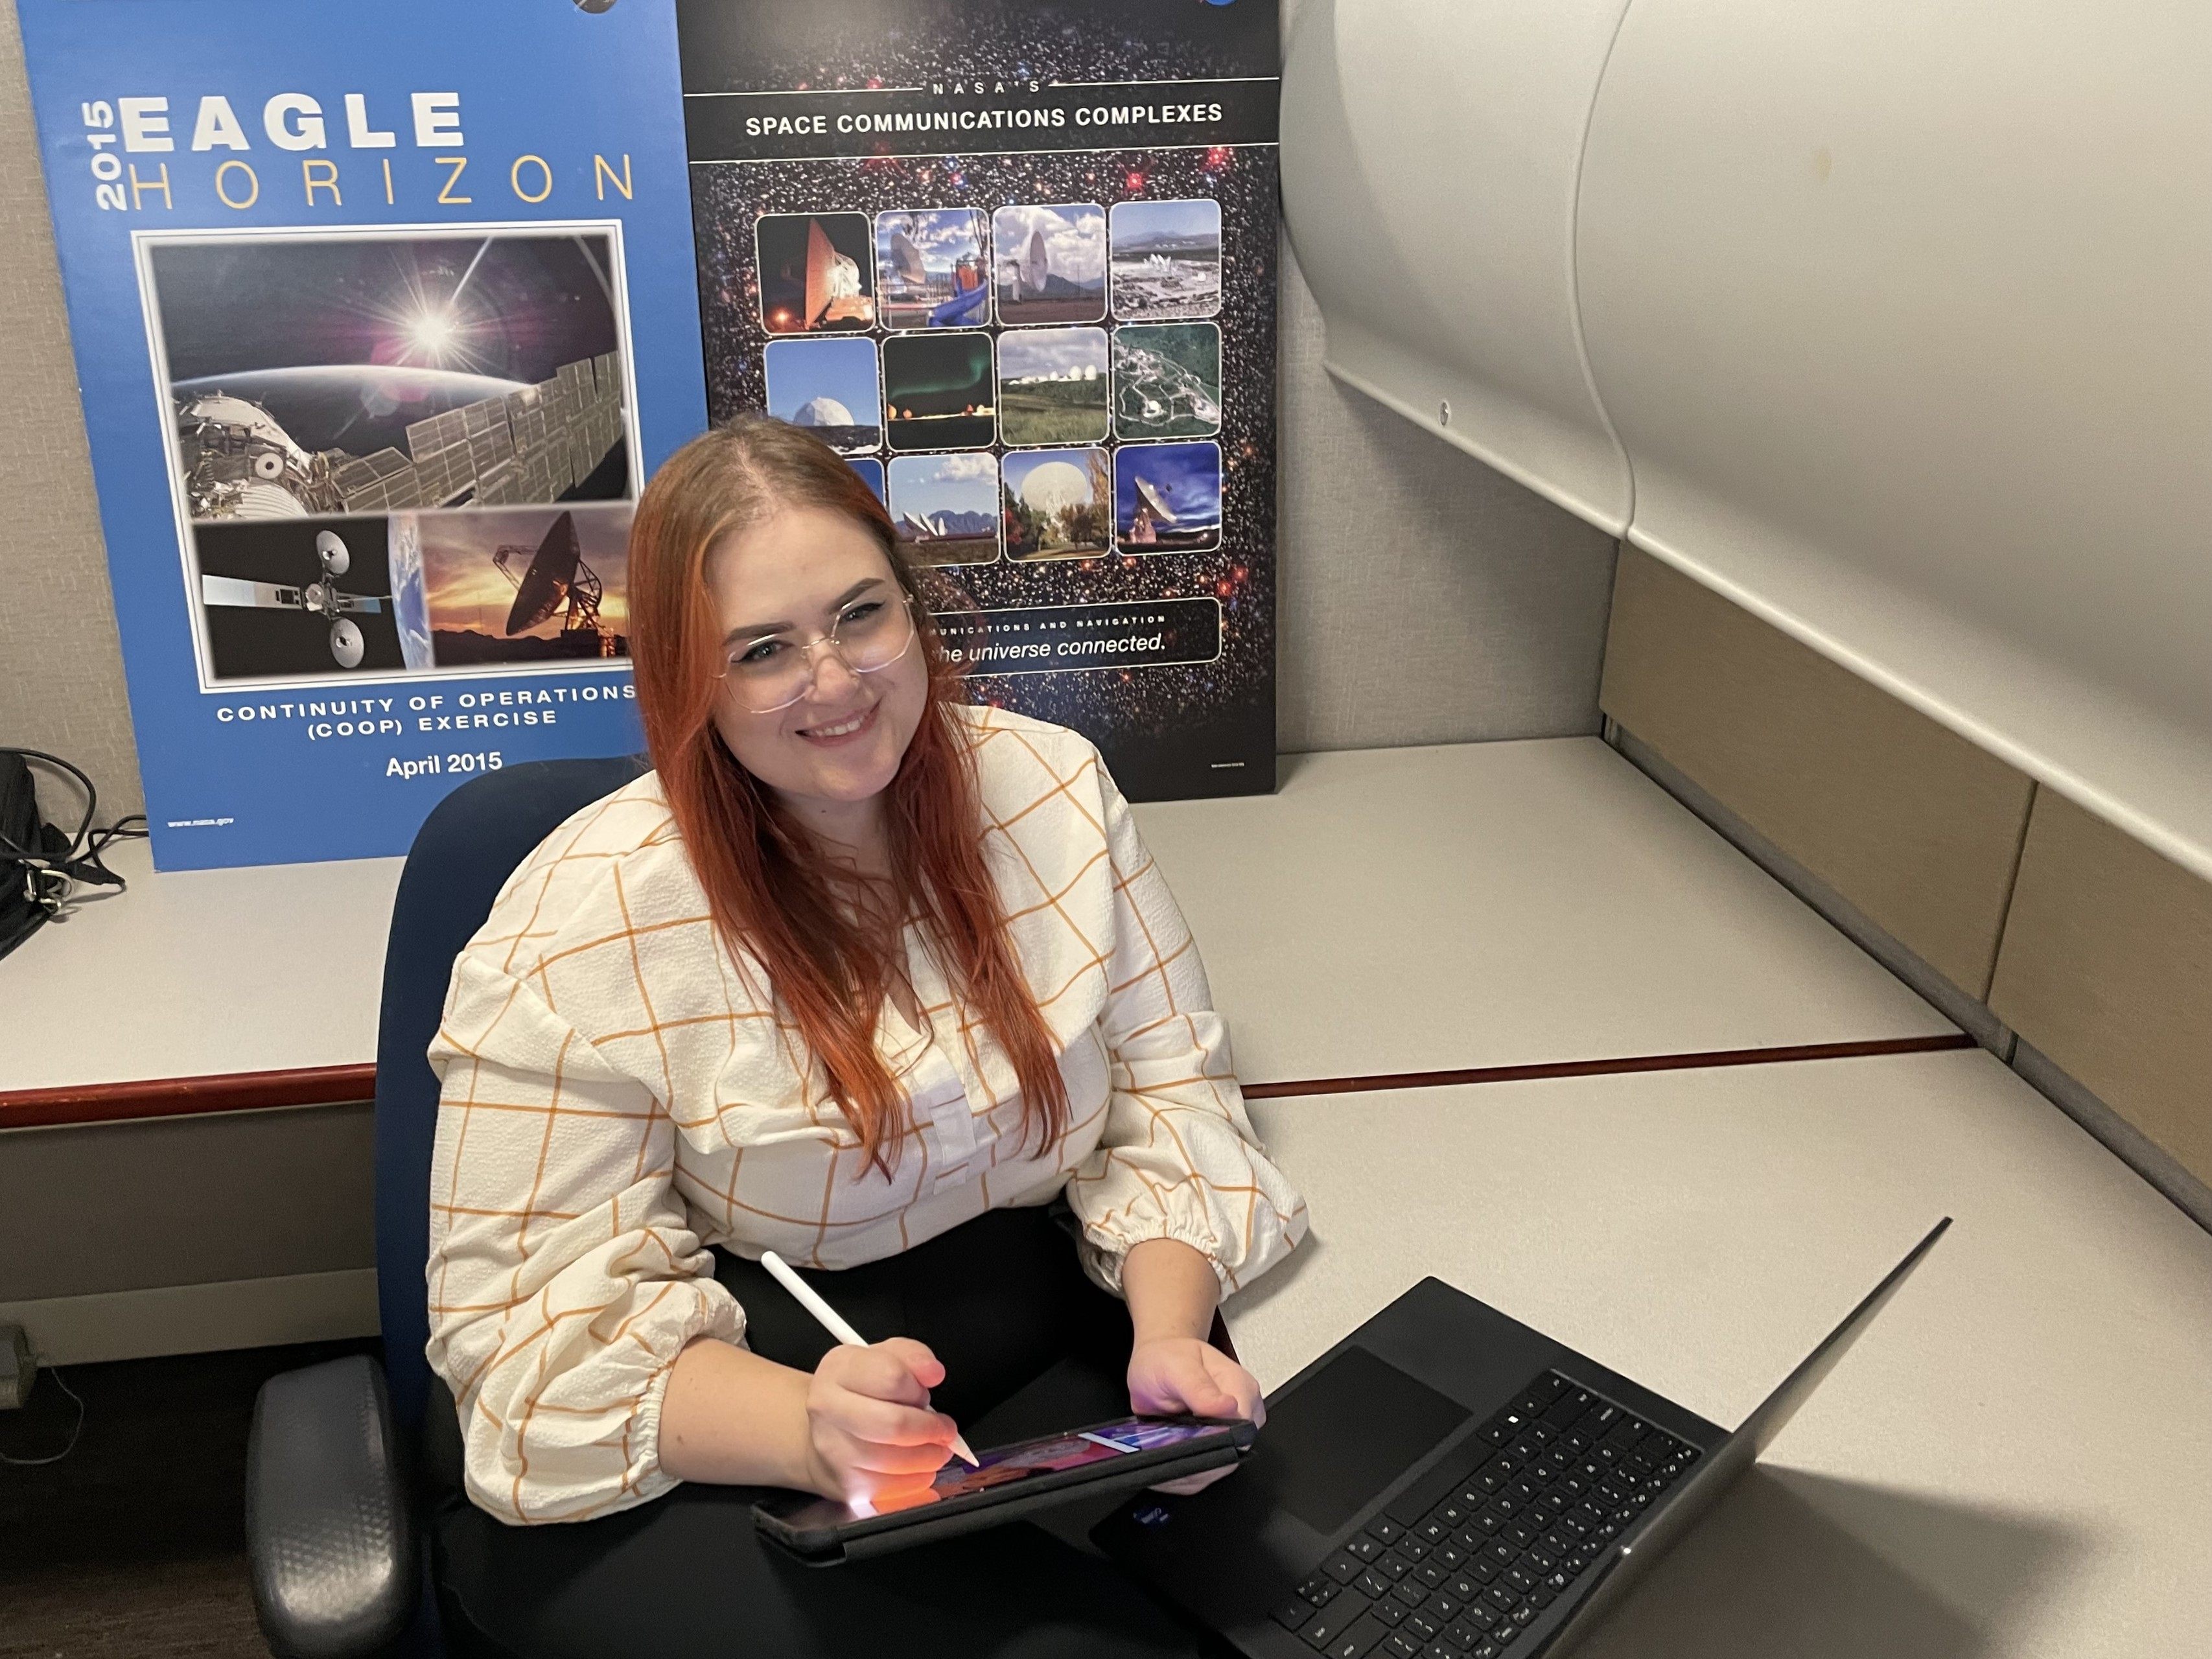 Heather Monaghan working on computer, while 2015 Eagle Horizon poster is behind her